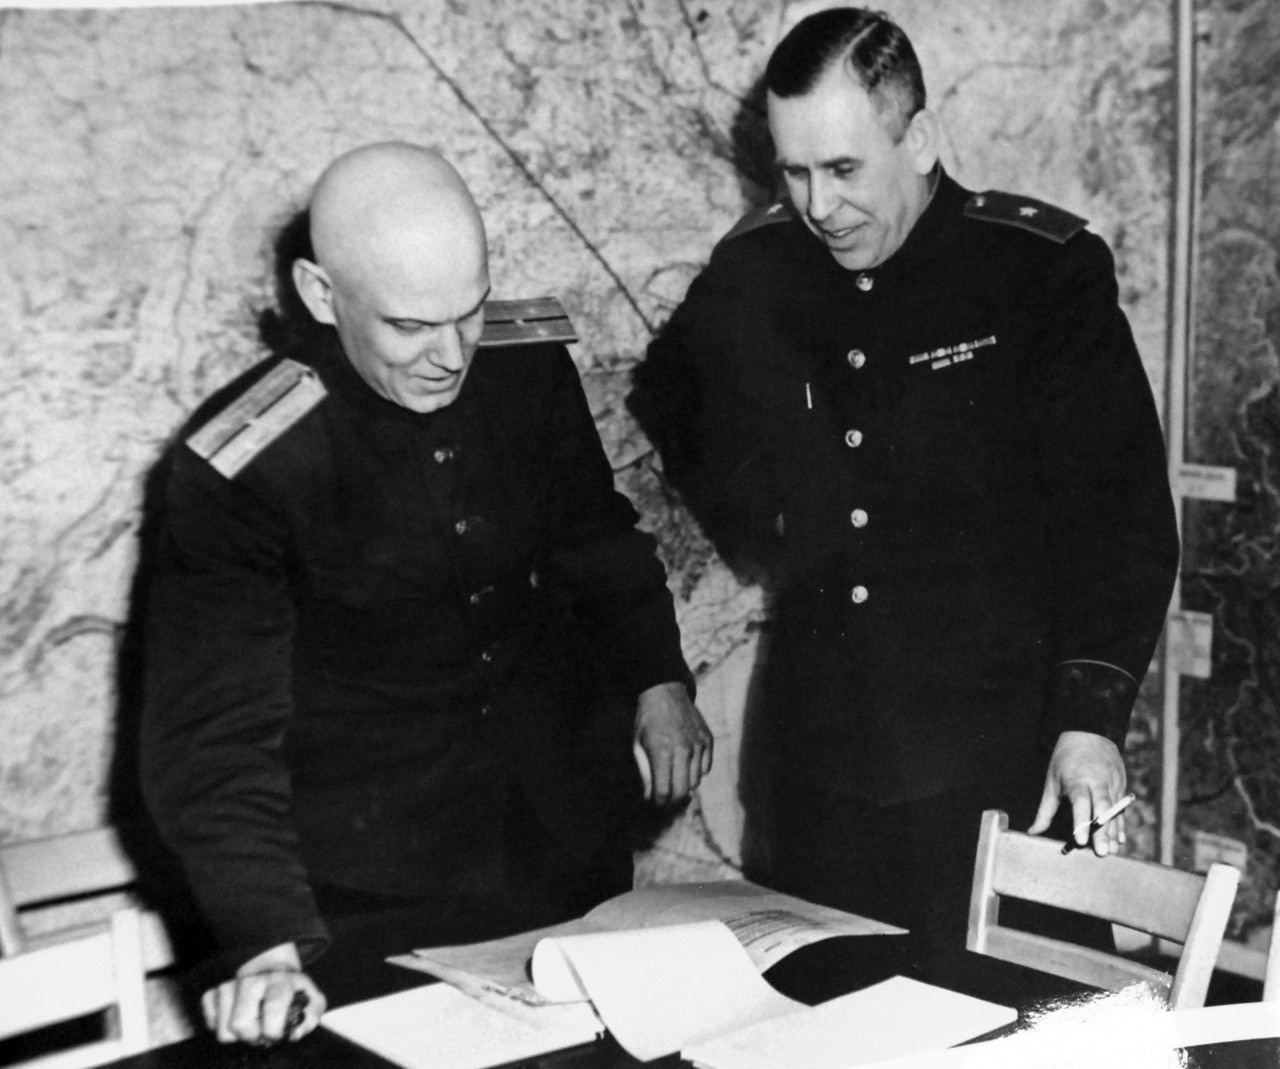 111-SC-27250:  Surrender of Germany, 7 May 1945. At SHAEF Forward Headquarters in Reims, France, Russian military representatives look over the Unconditional Surrender terms given to all German fighting forces.  Shown, left to right:  Lieutenant Ivan Cherniaeff, Aide and Interpreter, and Major General of Artillery Ivan Alexeyevich Susloparov.  This photograph is dated May 5, 1945.   U.S. Army Photograph.  This print was fading.  Courtesy of the Library of Congress Collection, Lot-8988. (2015/10/16).